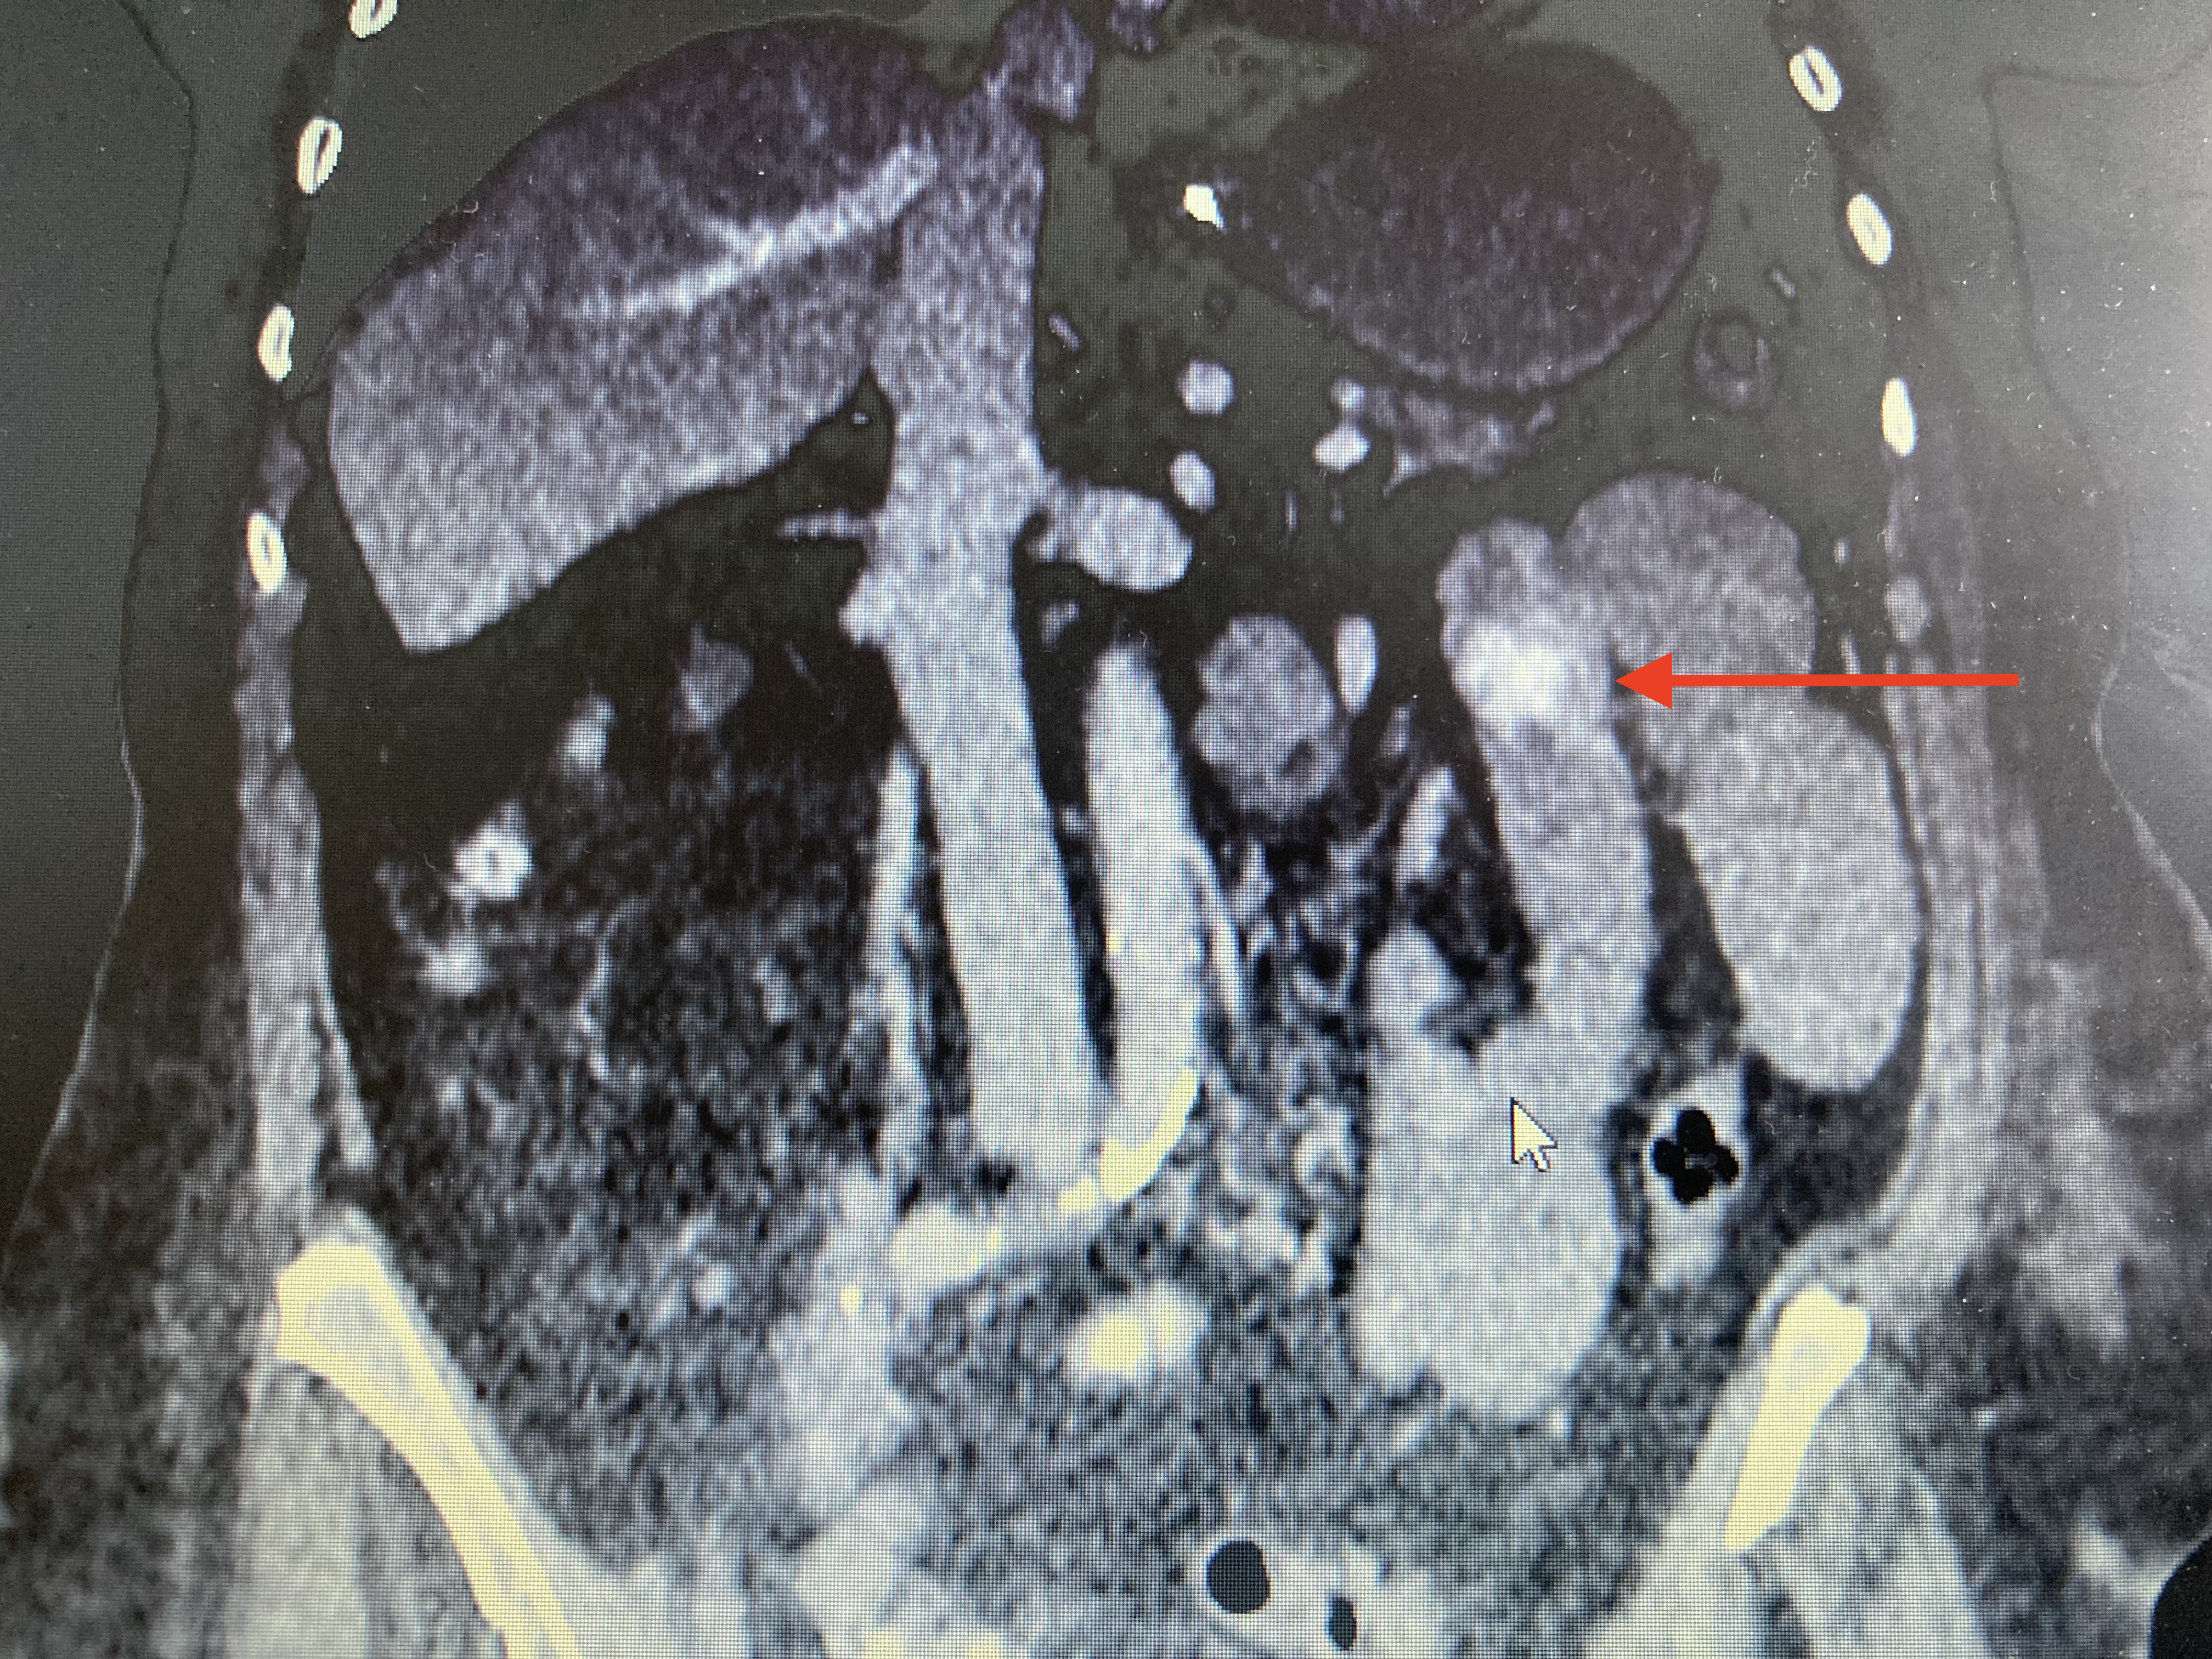 Computed tomography of the abdomen showing a migrated gallstone after endoscopic lithotripsy, causing gallstone ileus in the proximal jejunum